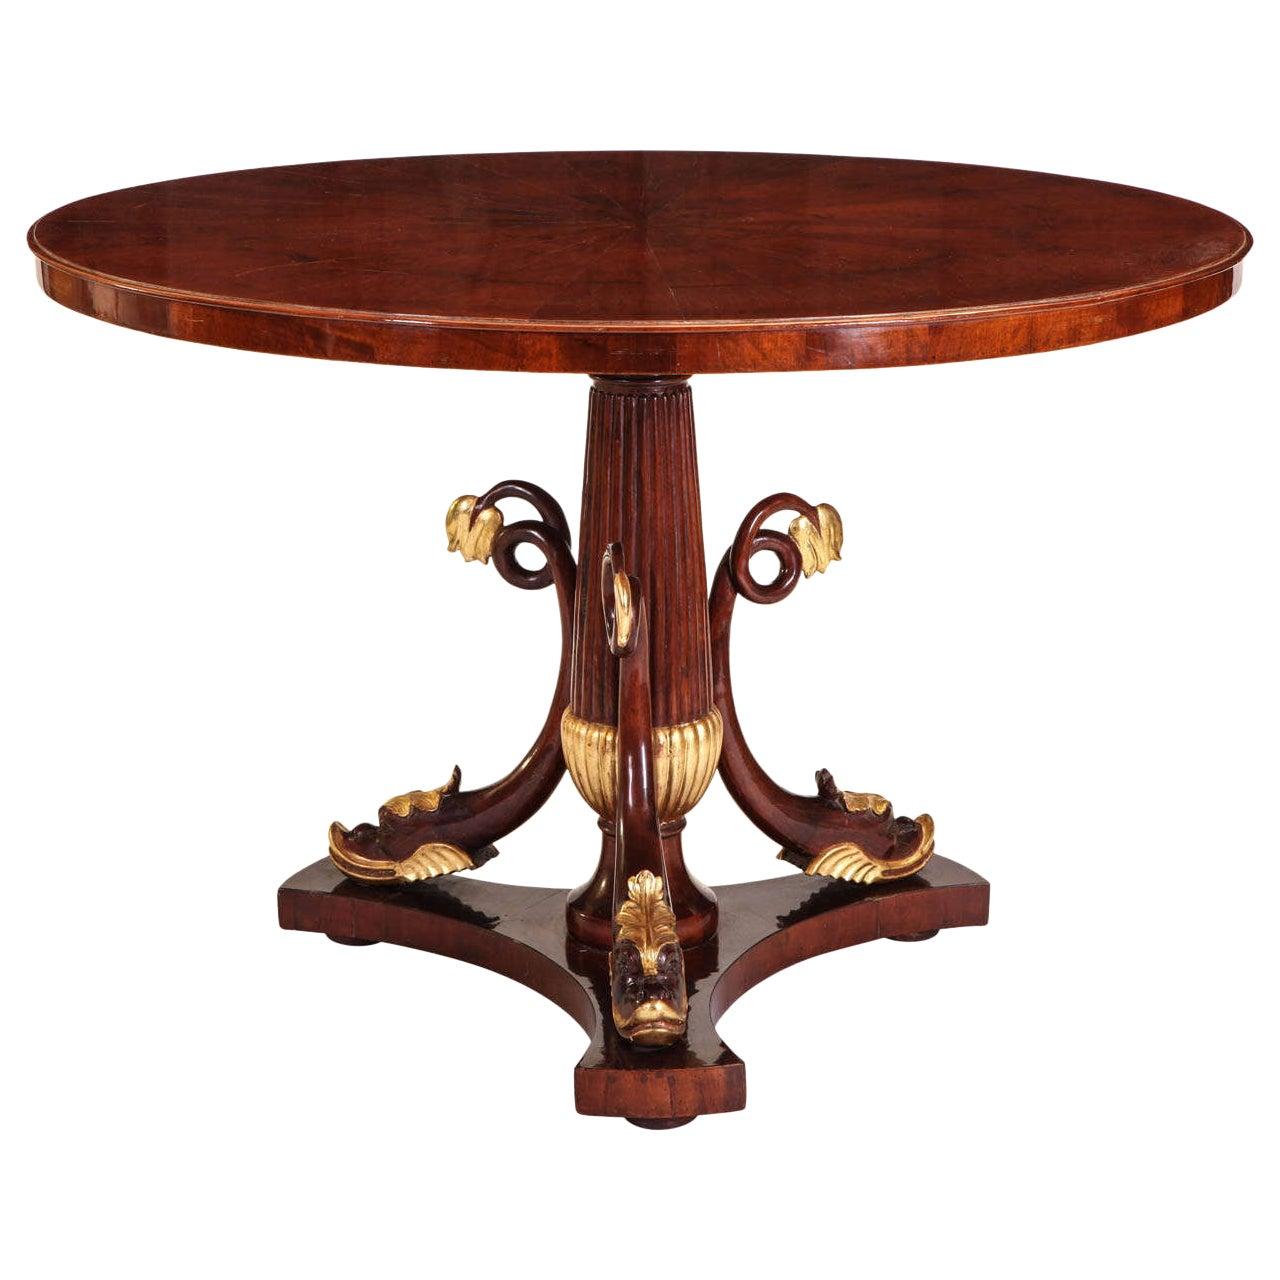 Italian Mahogany and Parcel-Gilt Centre Table, 1830 For Sale